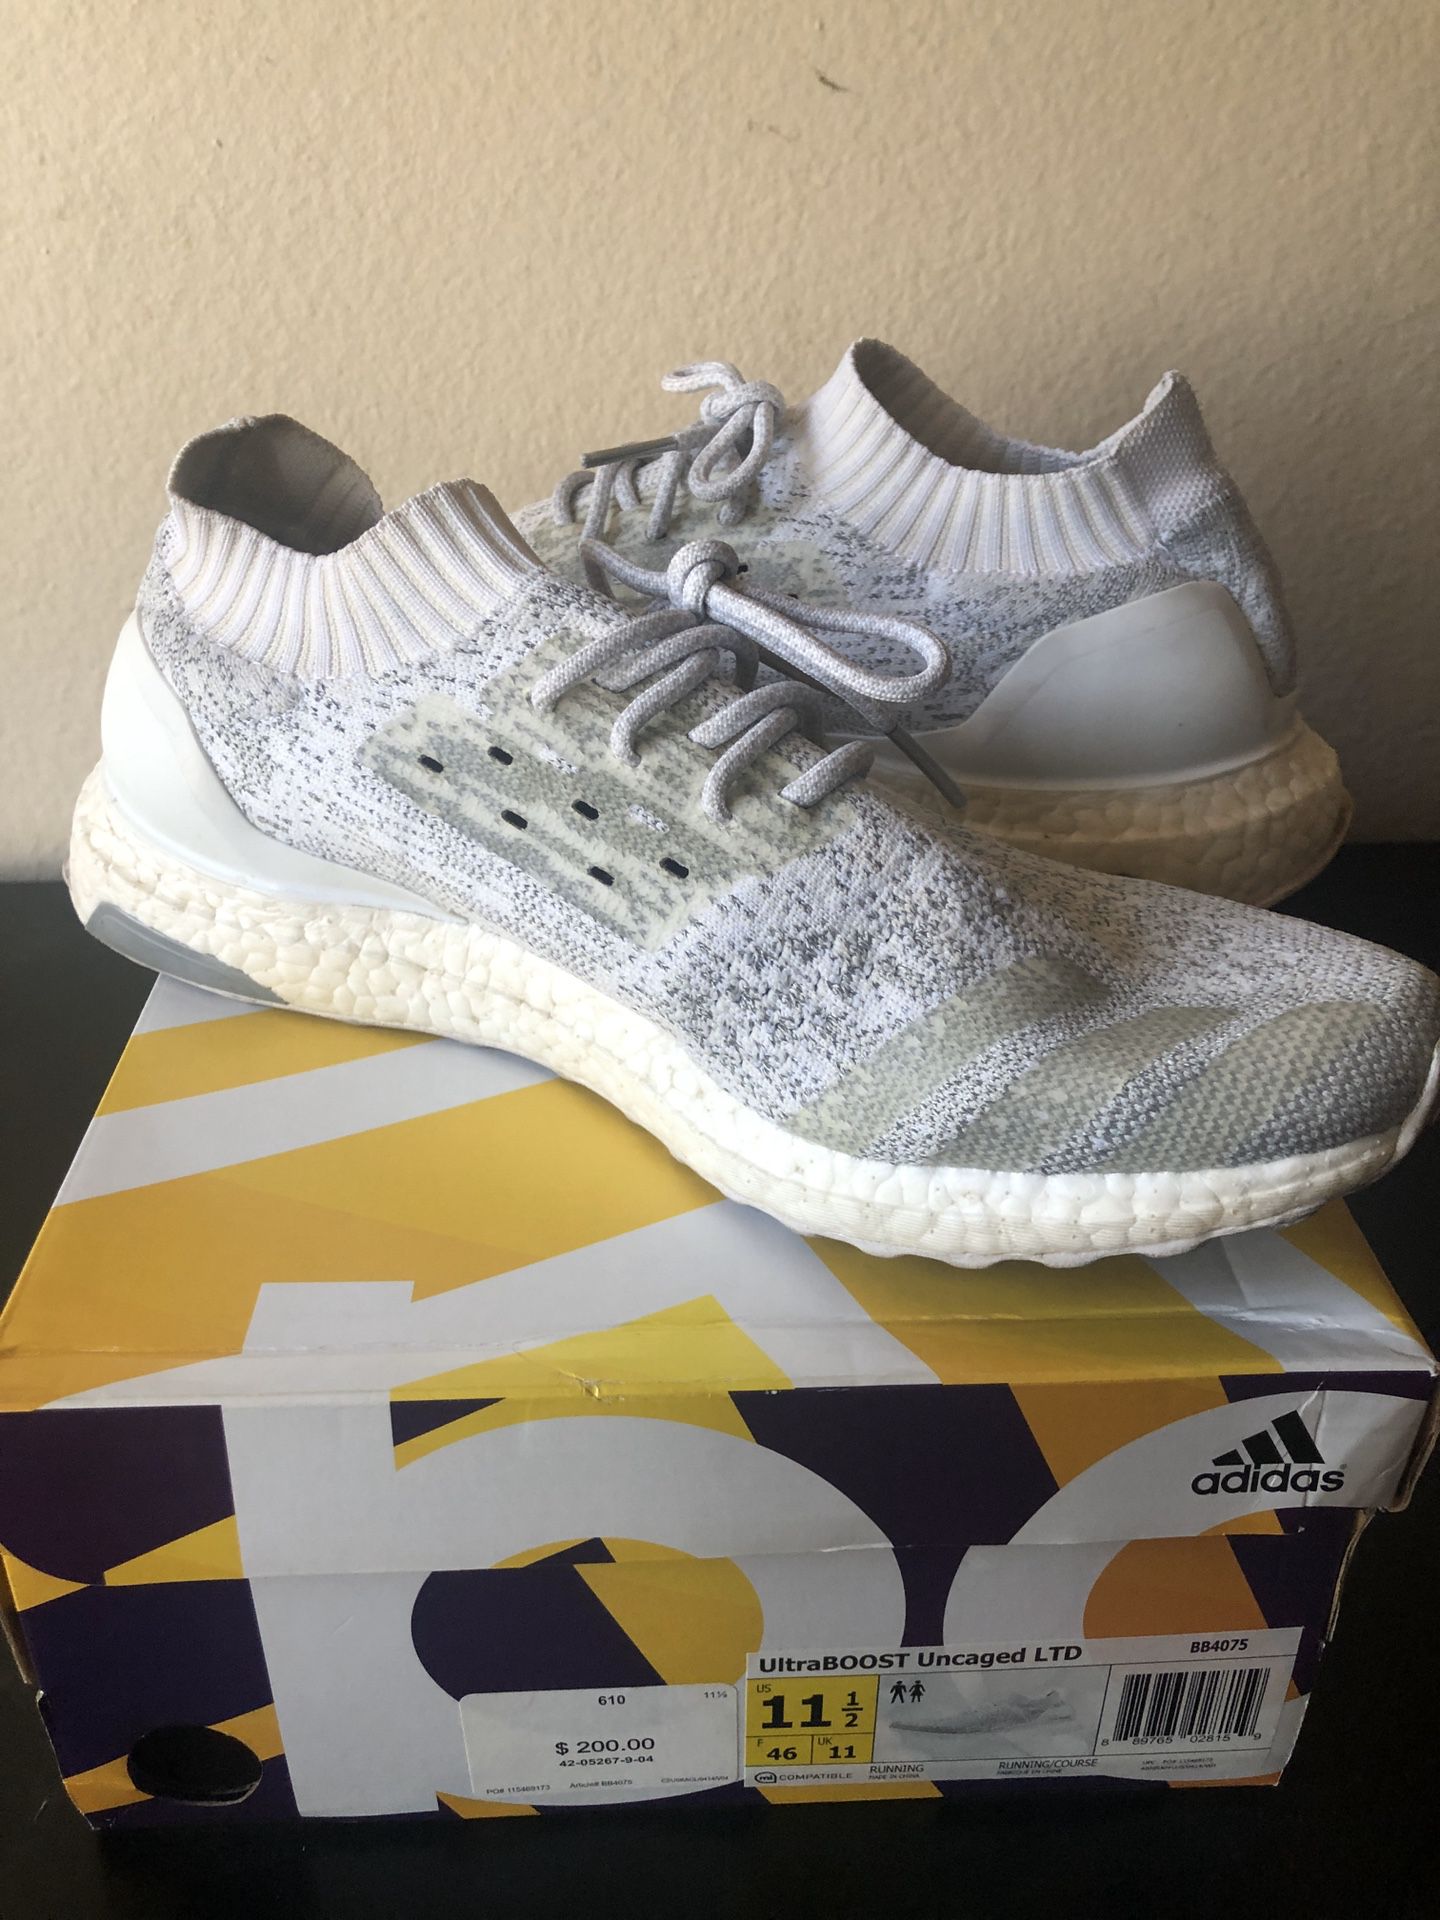 Poesi rynker Bløde Adidas Ultra Boost Uncaged “White Reflective” 11.5 for Sale in Los Angeles,  CA - OfferUp